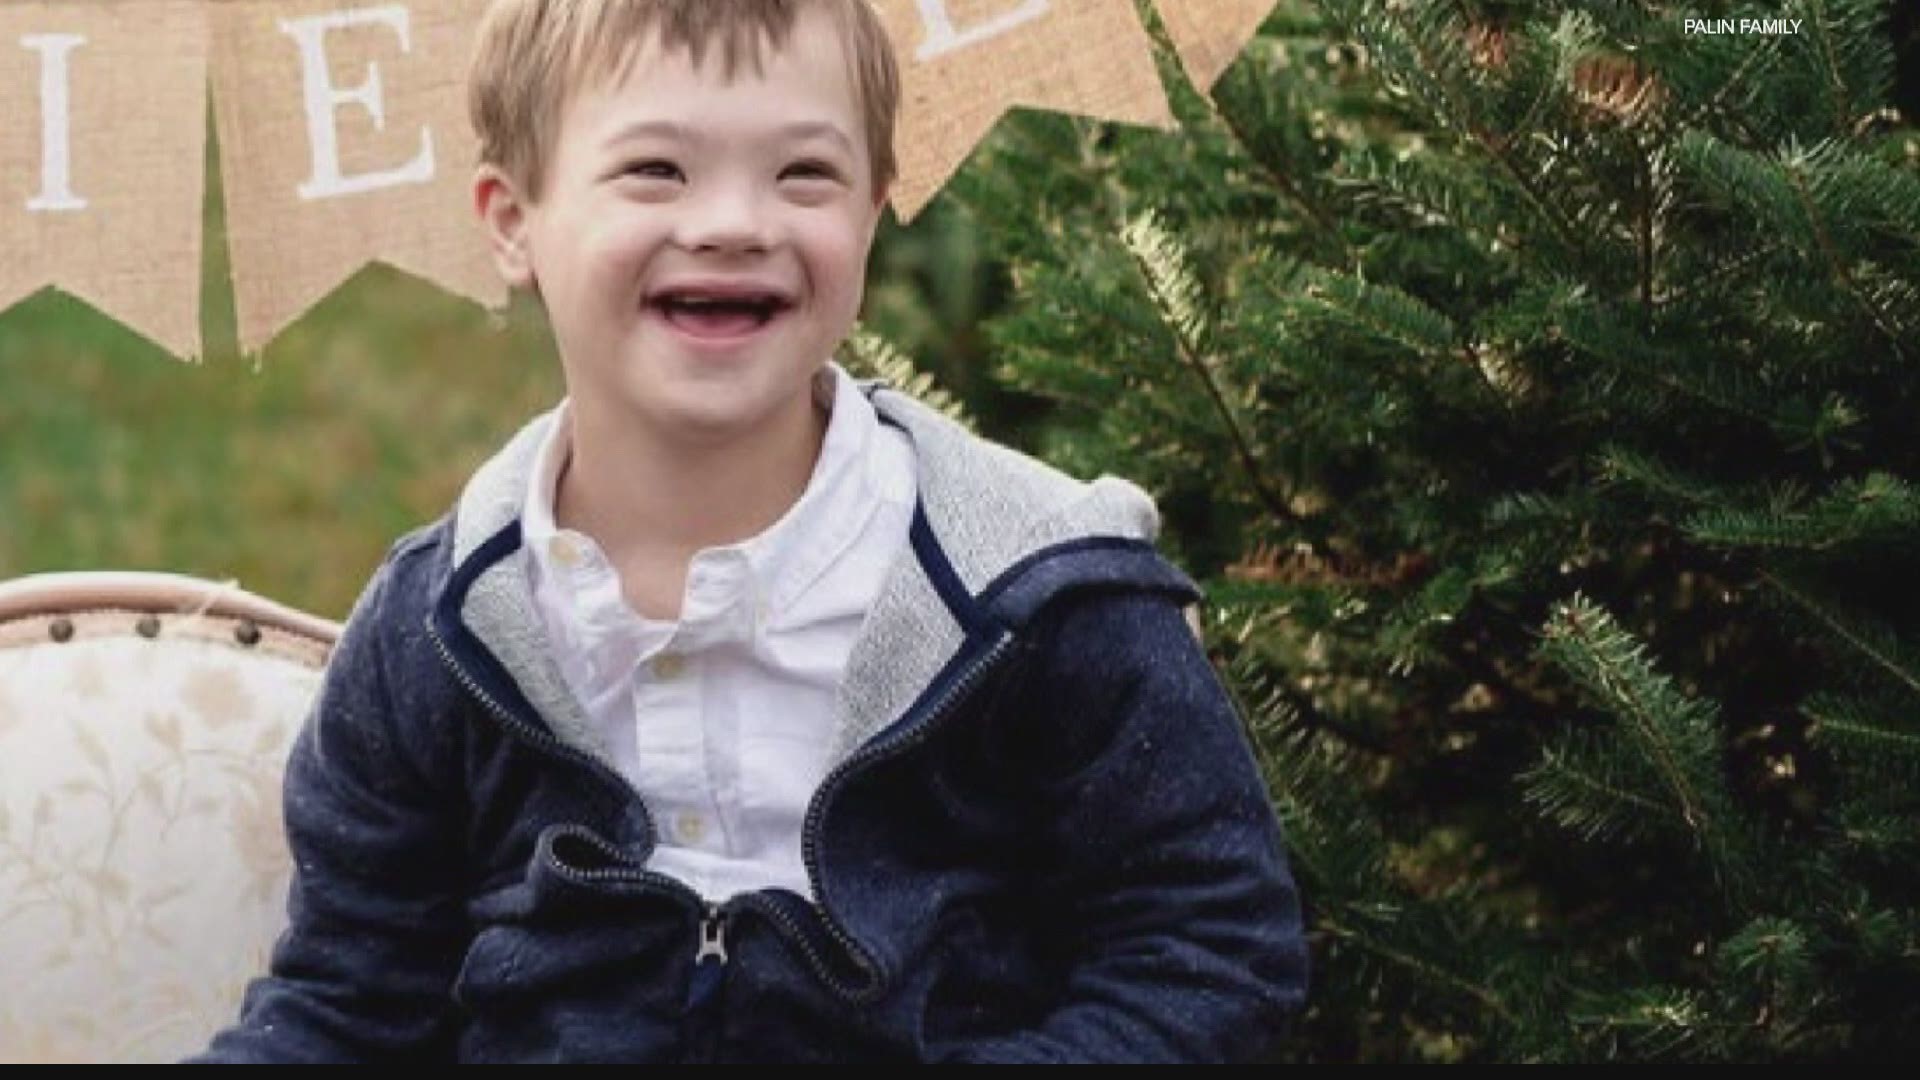 Advocates for Hoosiers with Down syndrome and their families are calling on the state to open up vaccine eligibility to care givers and family members.